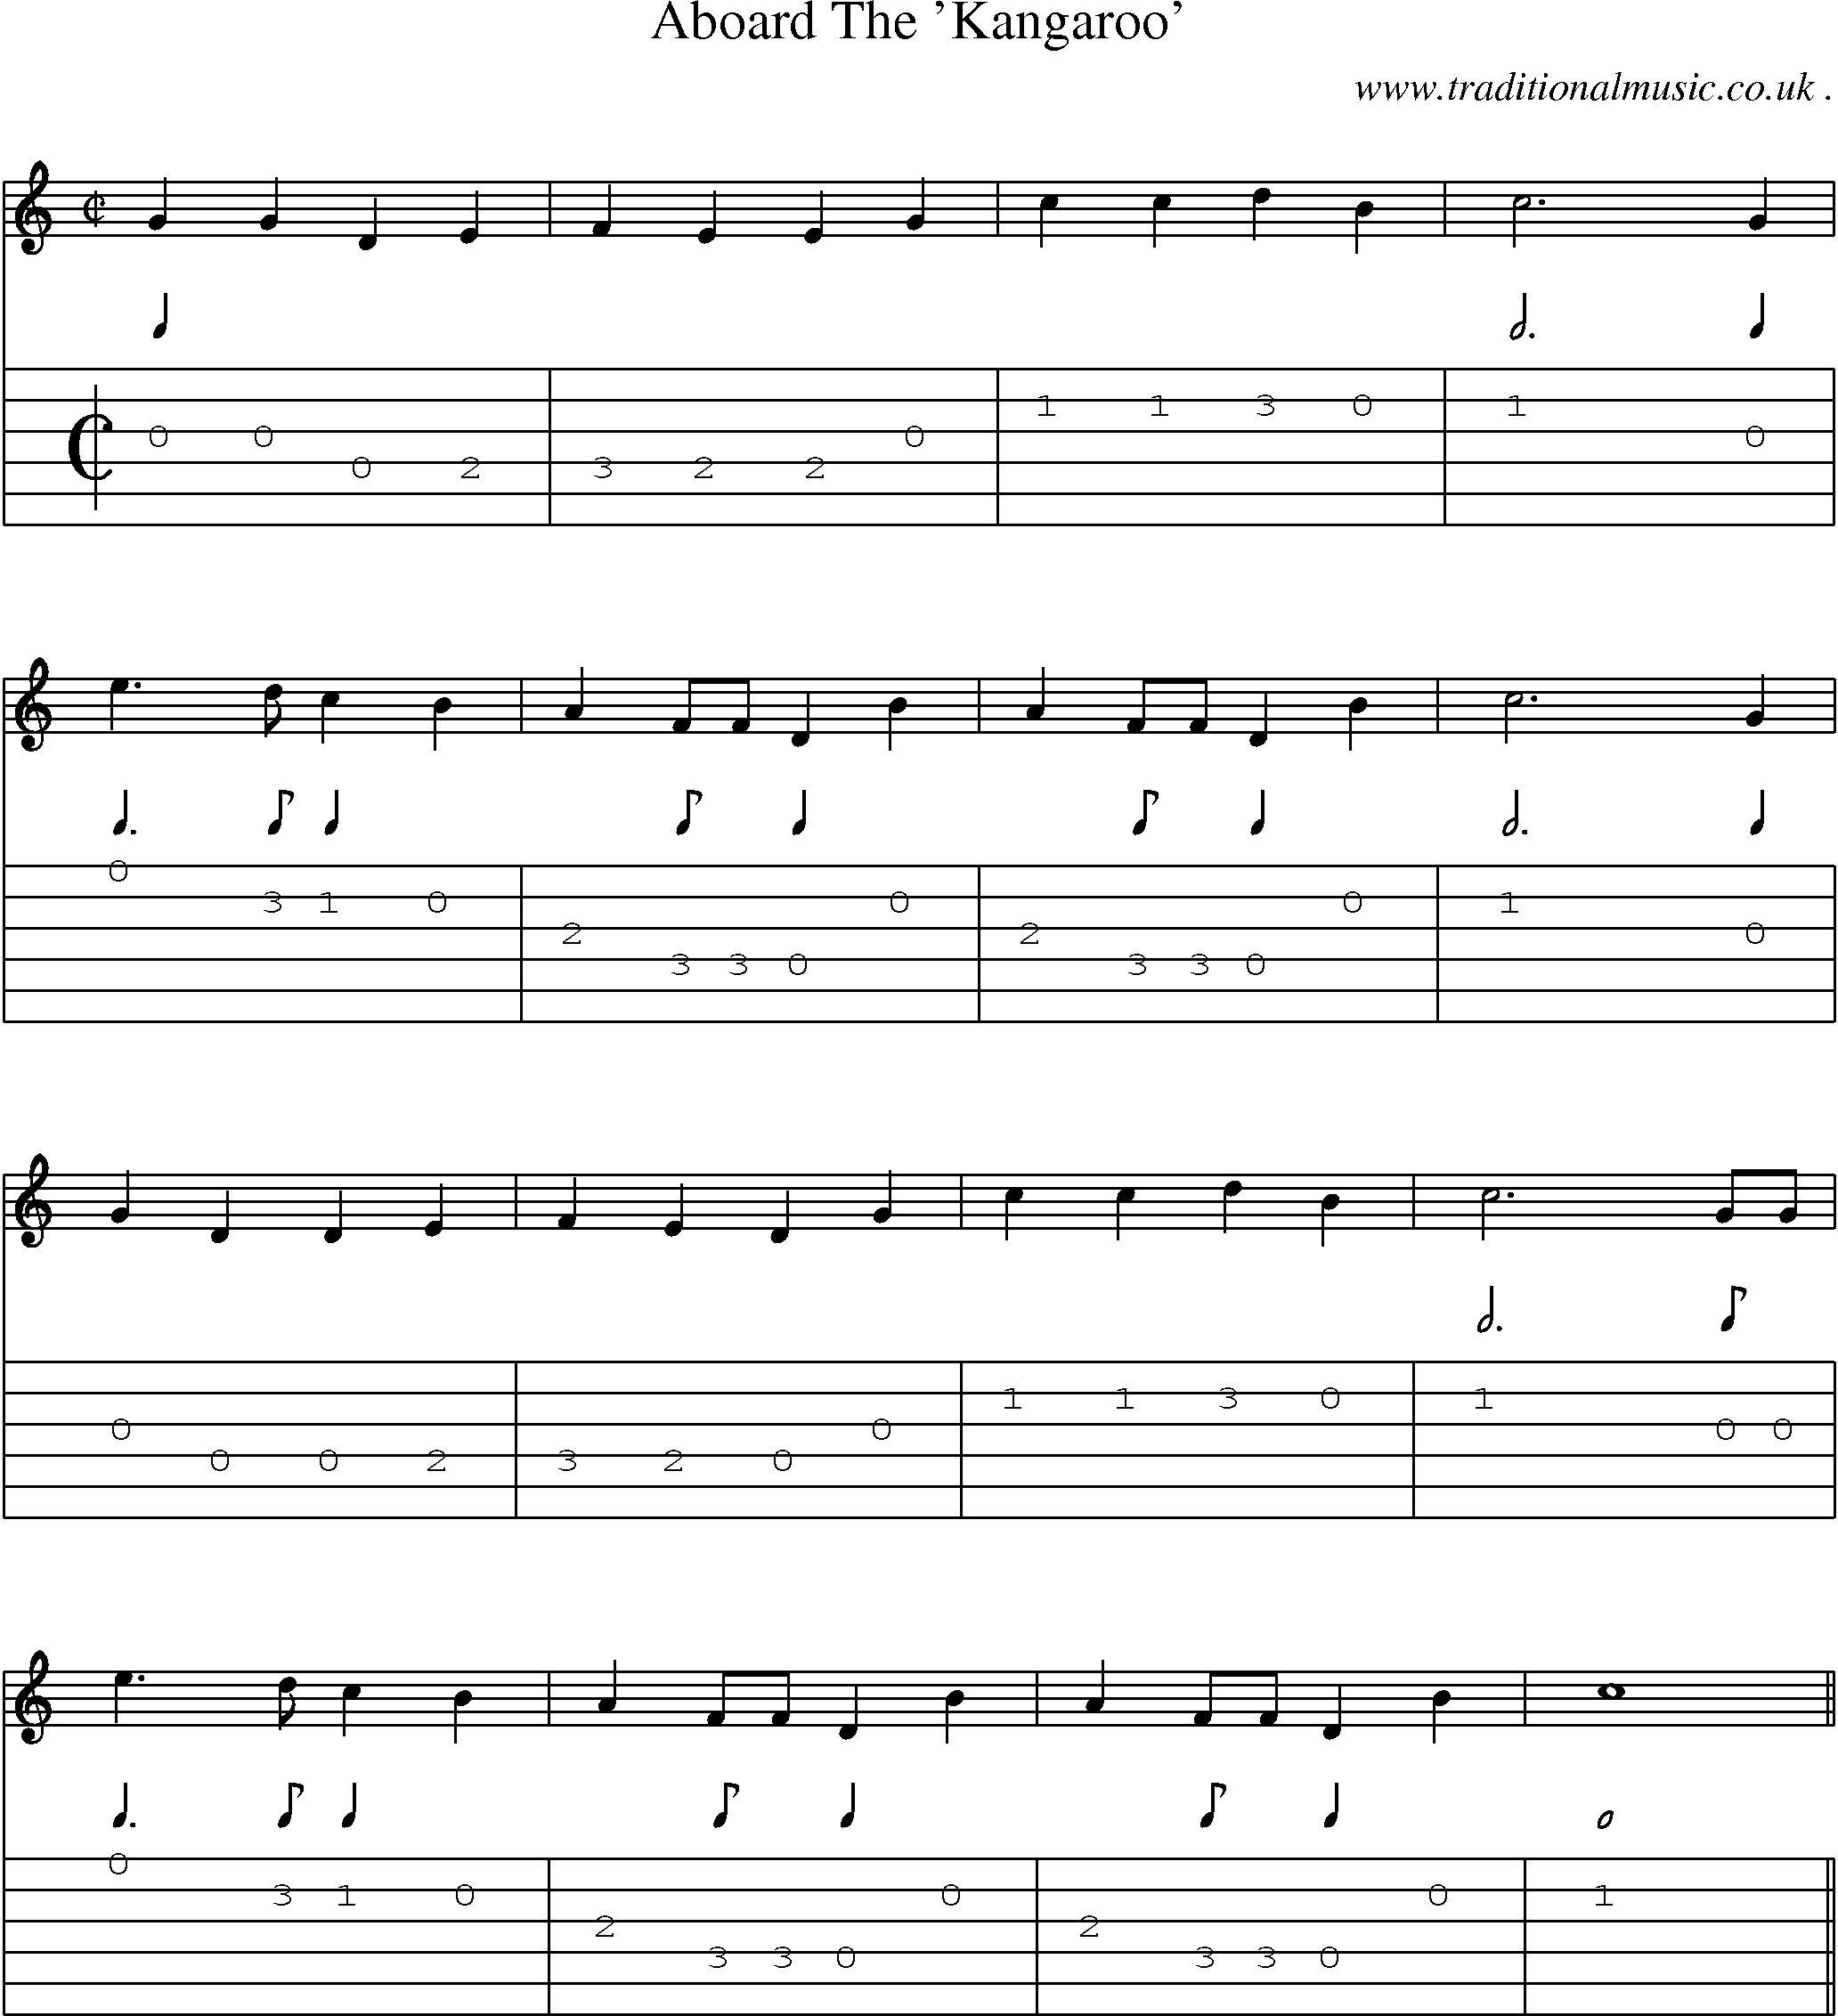 Sheet-Music and Guitar Tabs for Aboard The Kangaroo